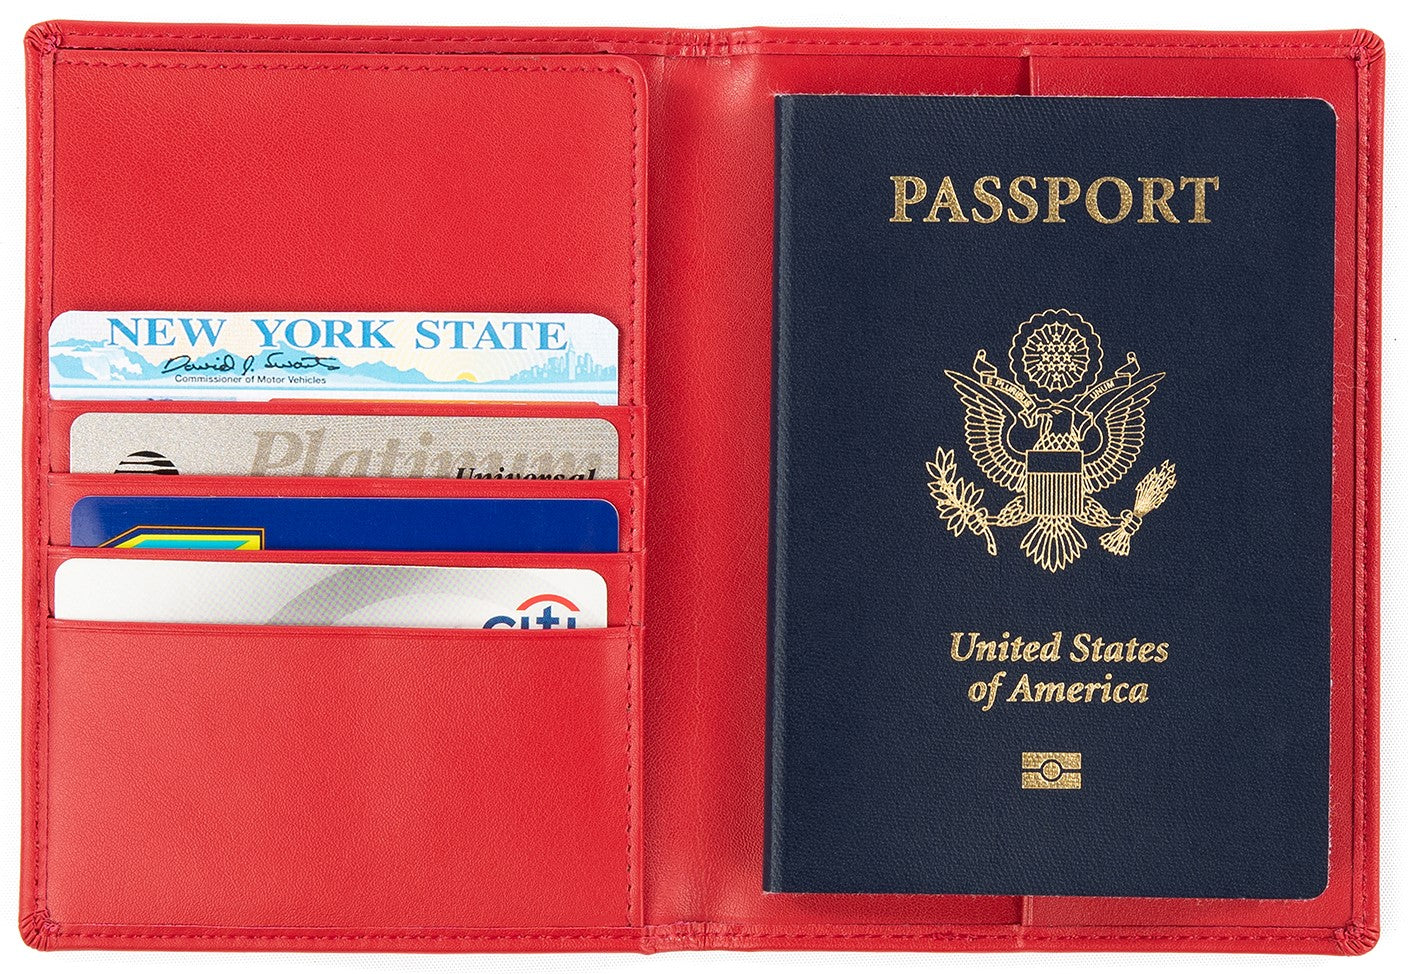 
Leather Passport Cover